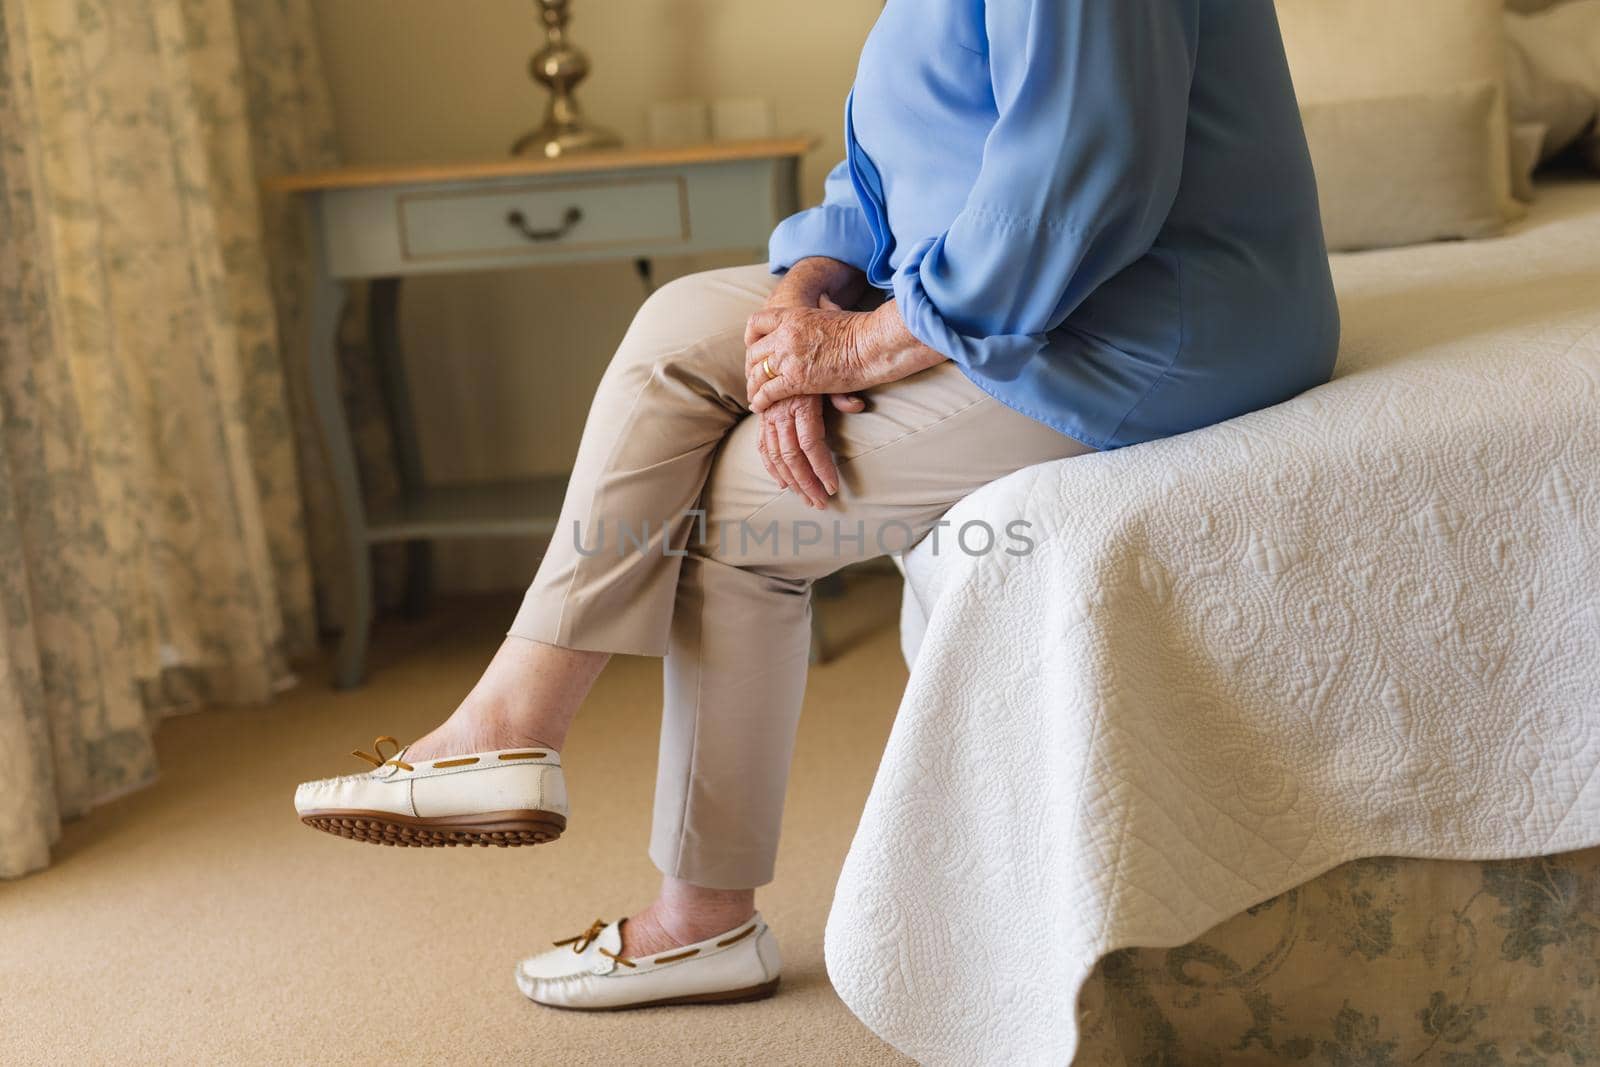 Senior caucasian woman sitting on bed and thinking in bedroom. retreat, retirement and senior lifestyle concept.